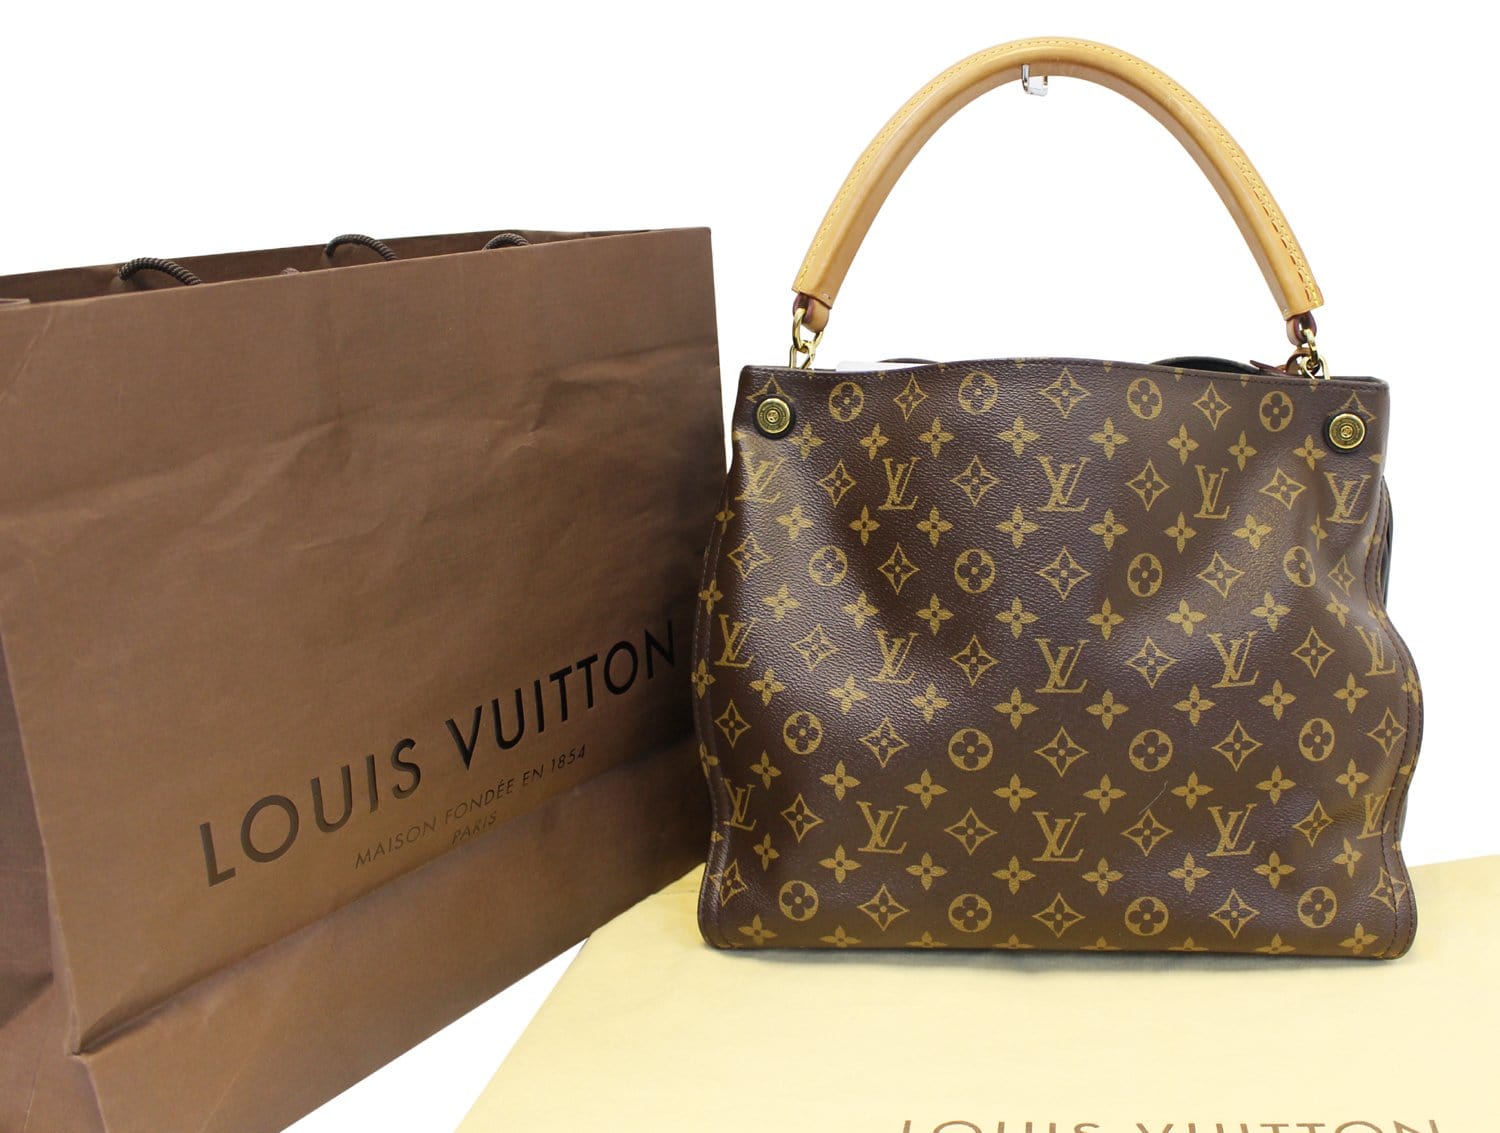 WHAT'S IN MY HANDBAG, LOUIS VUITTON MONTAIGNE GM, MOMMY EDITION